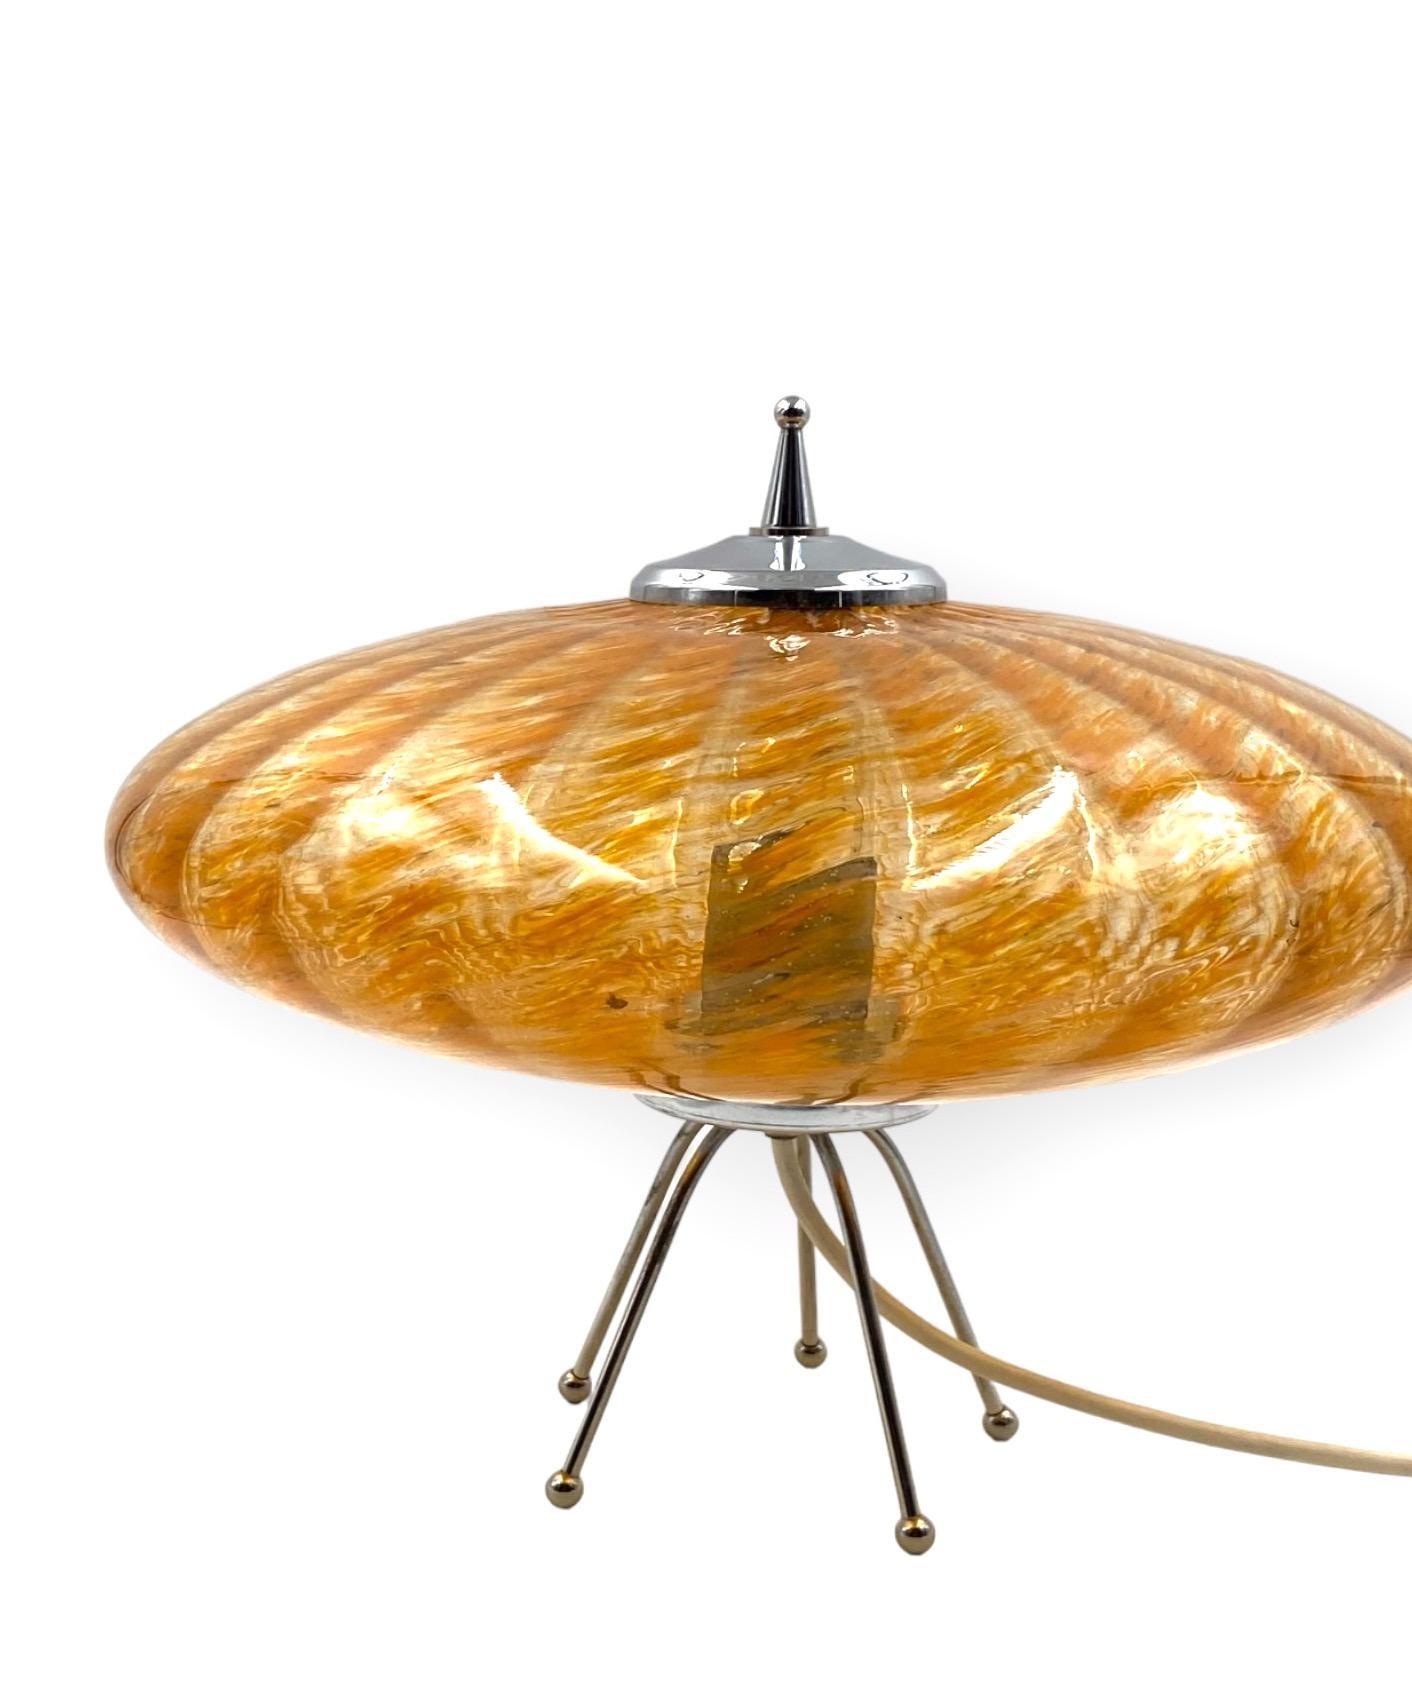 Murano orange glass flying saucer Ufo table lamp, Murano Italy 1970s For Sale 9